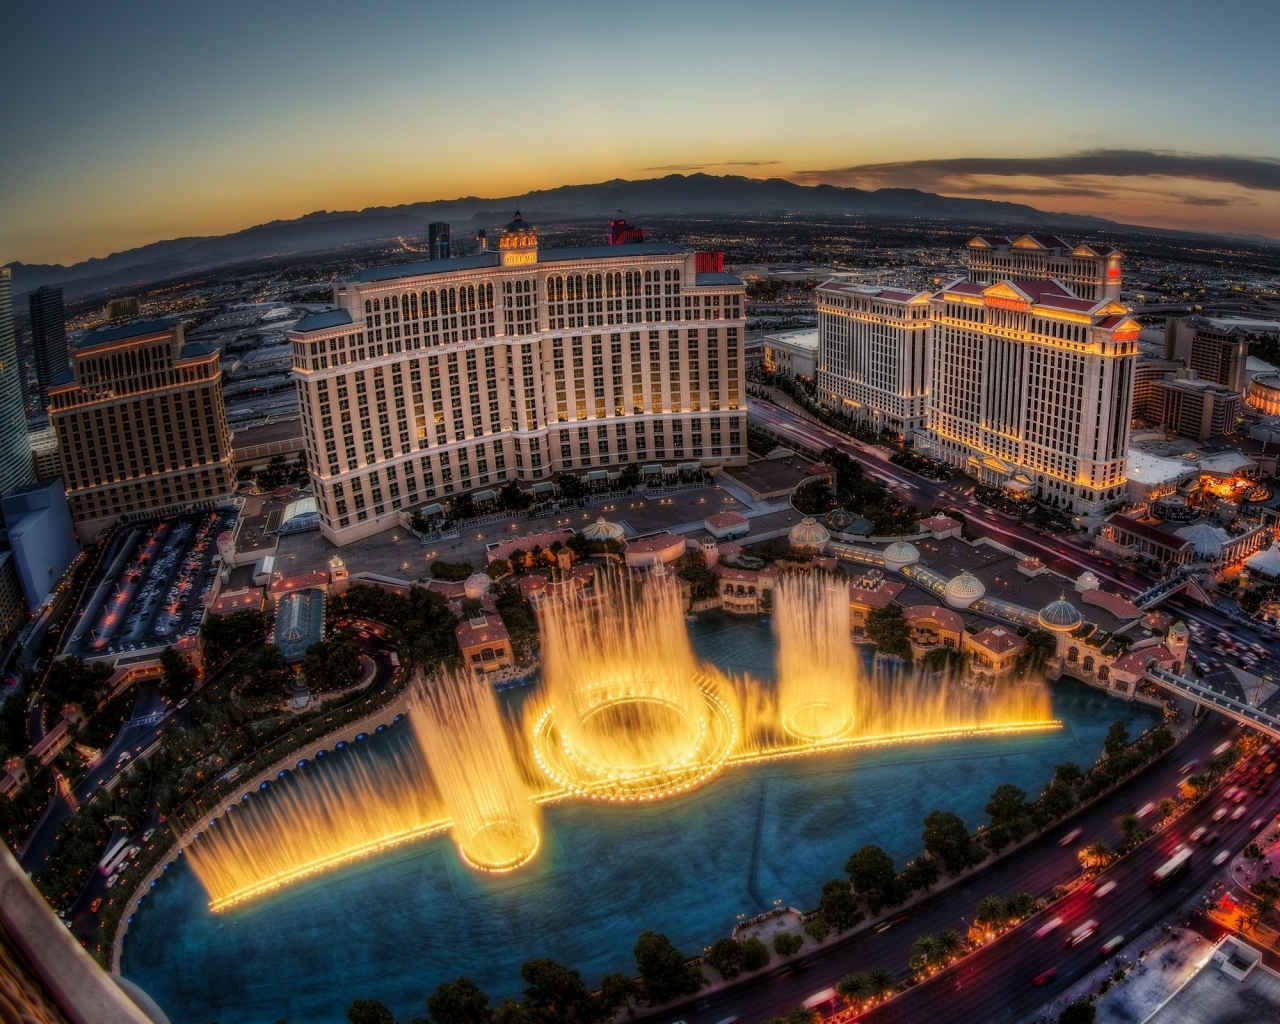 Bellagio from Ocean's 11 is one of the most glamorous movie hotels for good reason.